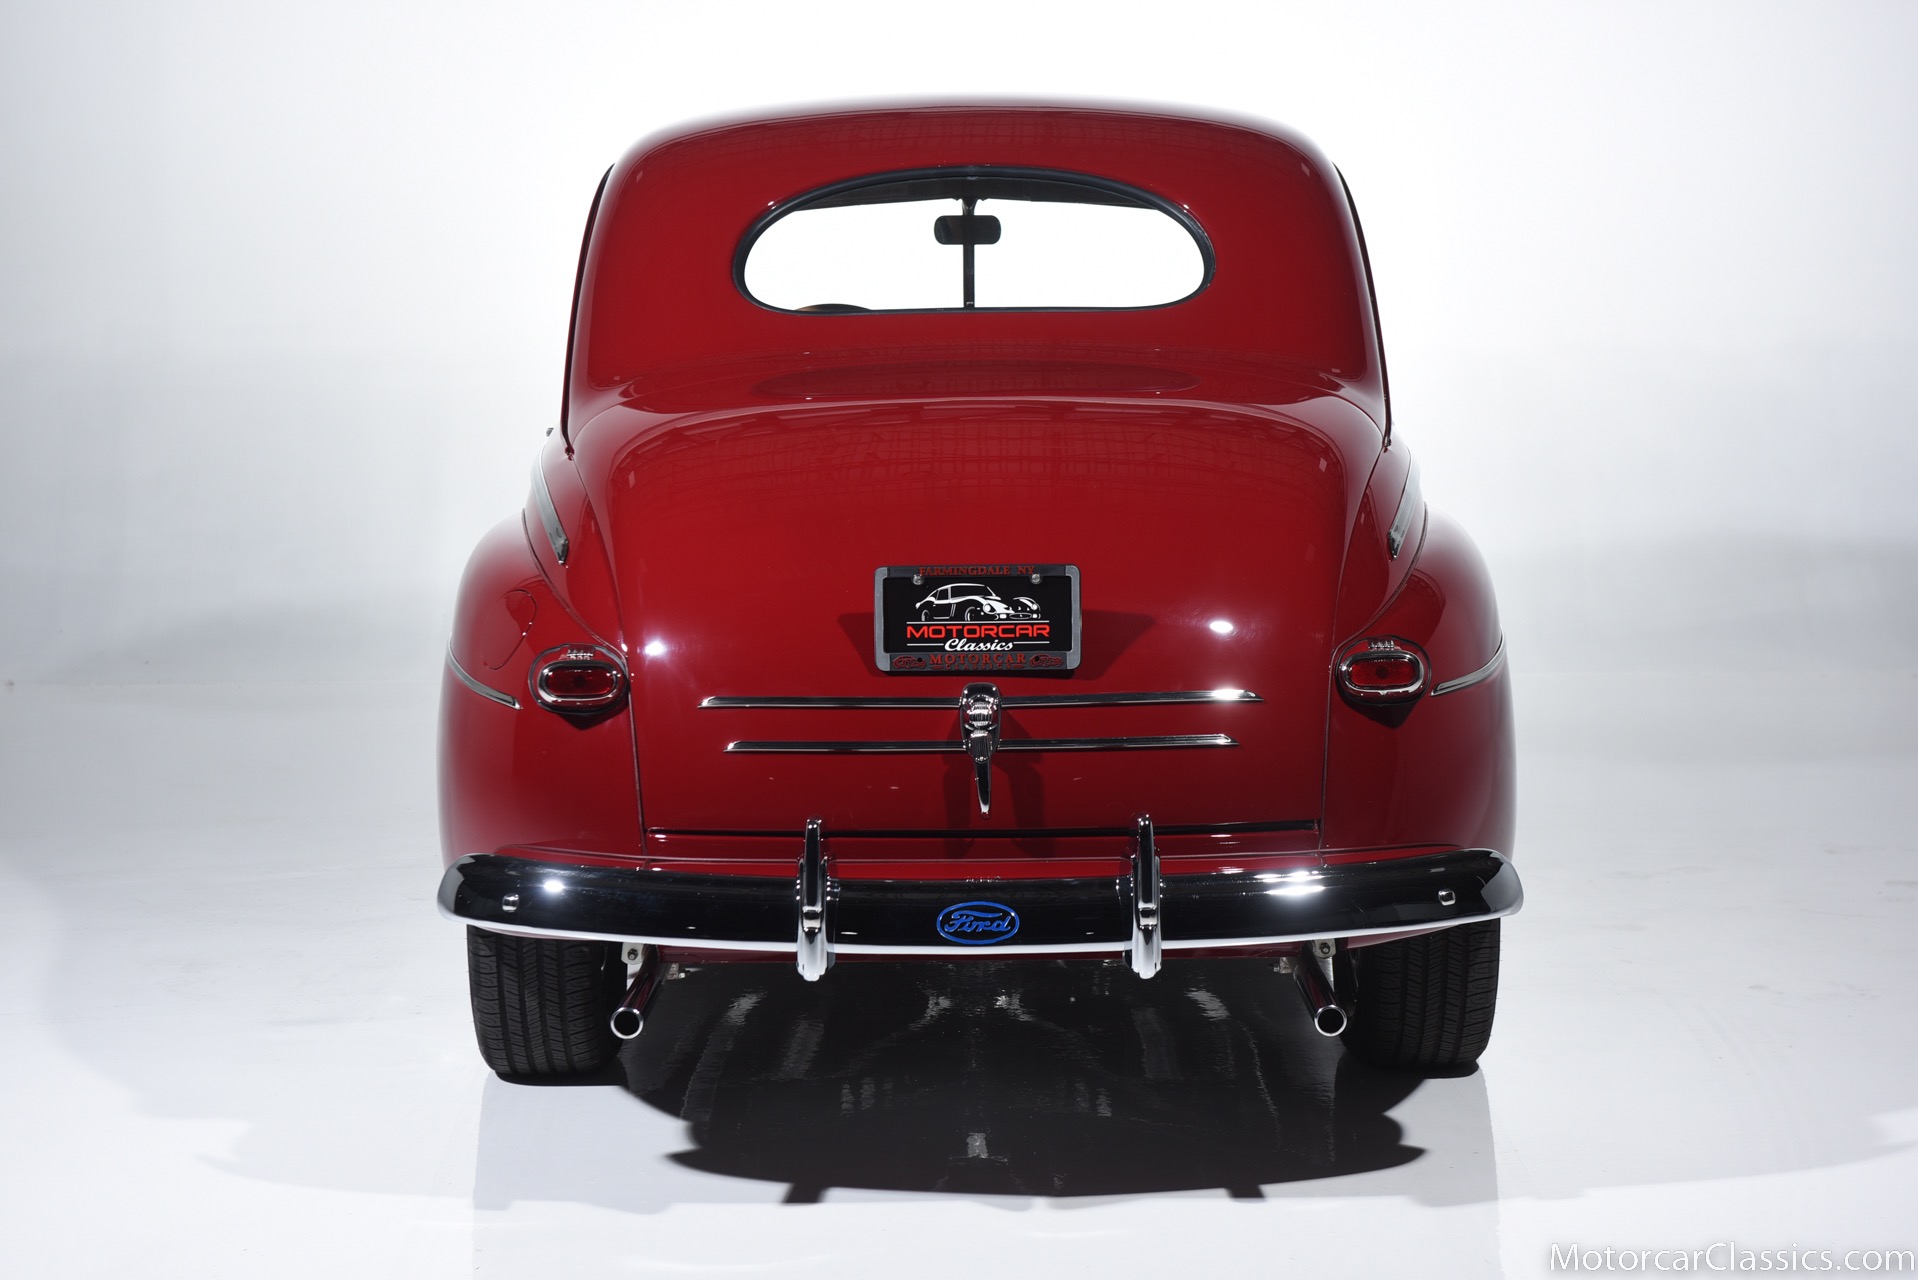 1946 Ford Super Deluxe 